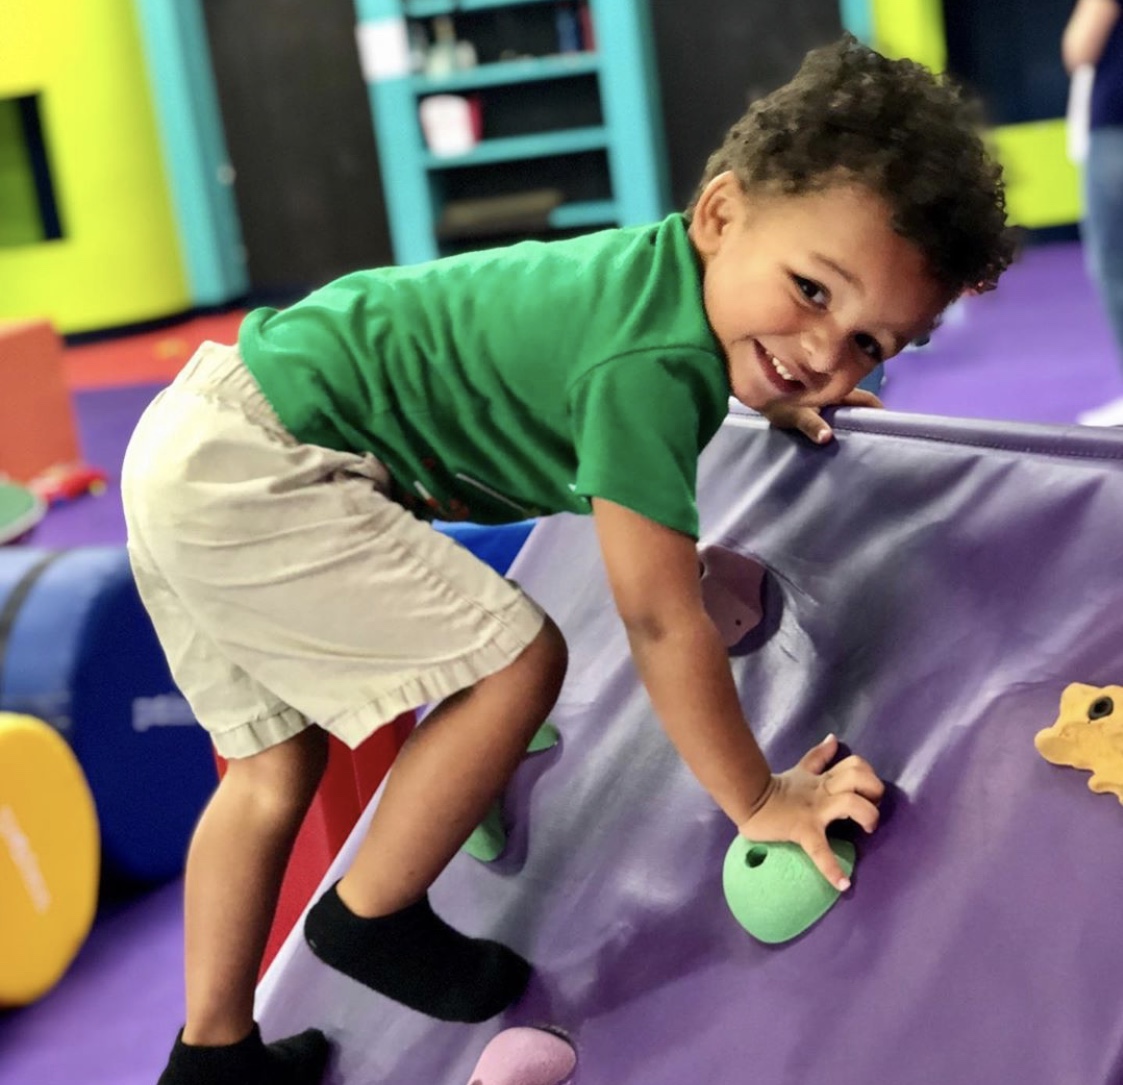 Come play, learn, and explore with us at Romp n' Roll Wethersfield!